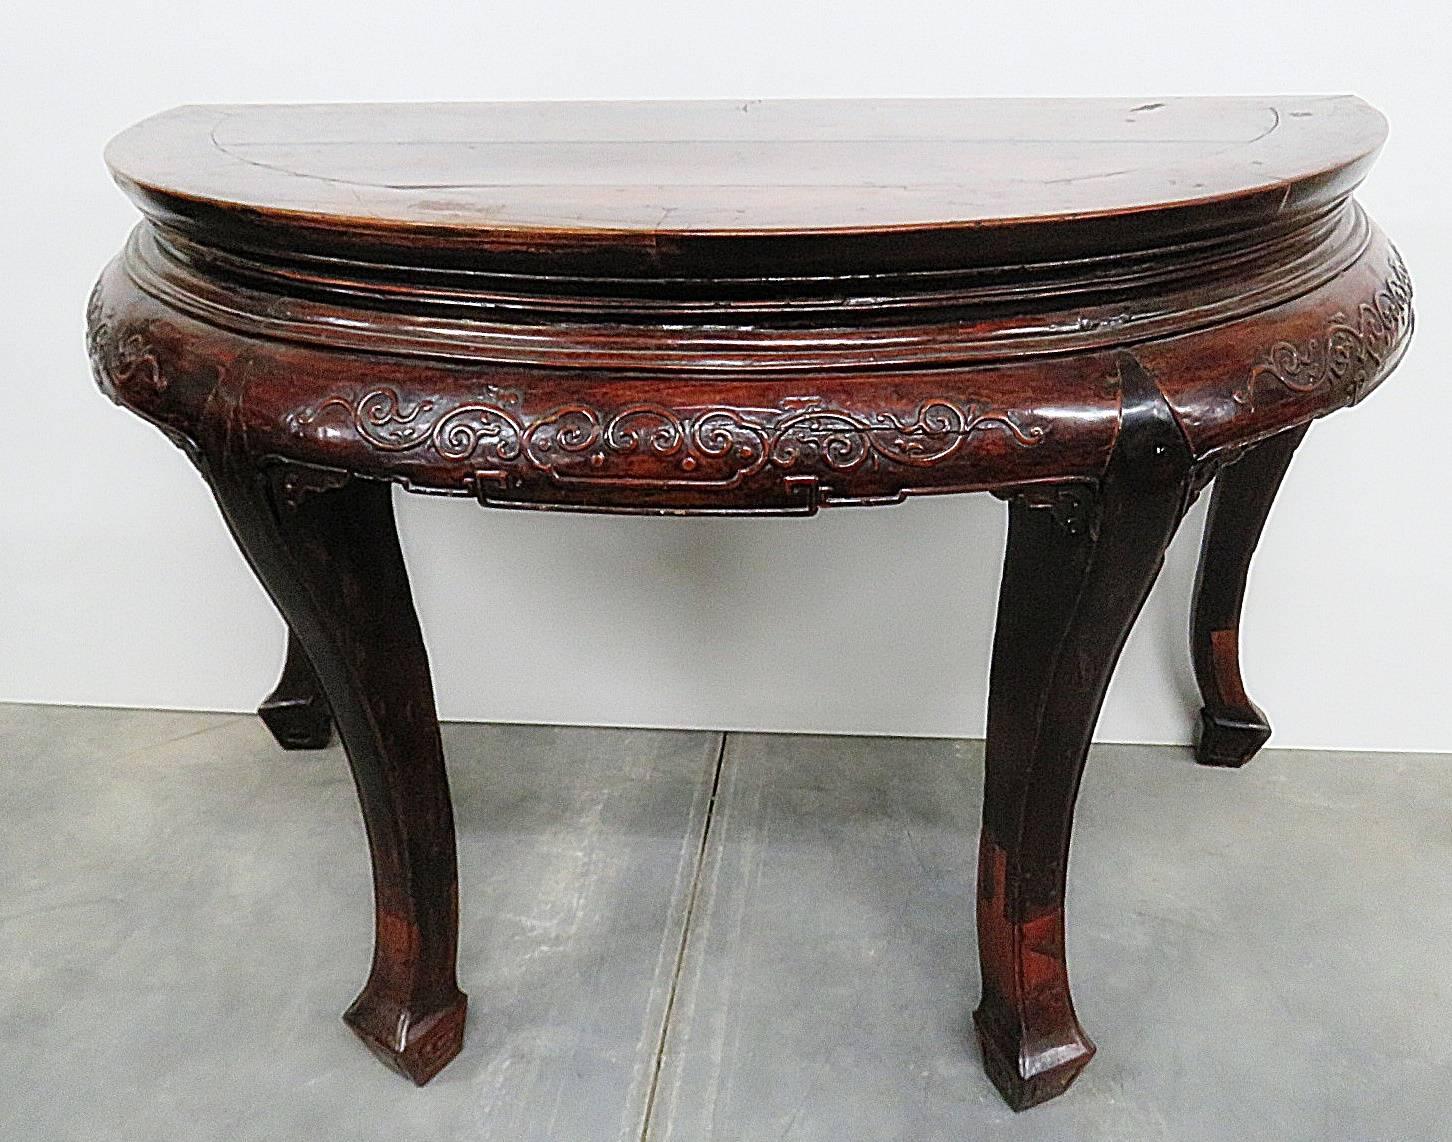 Antique demilune carved hall table.